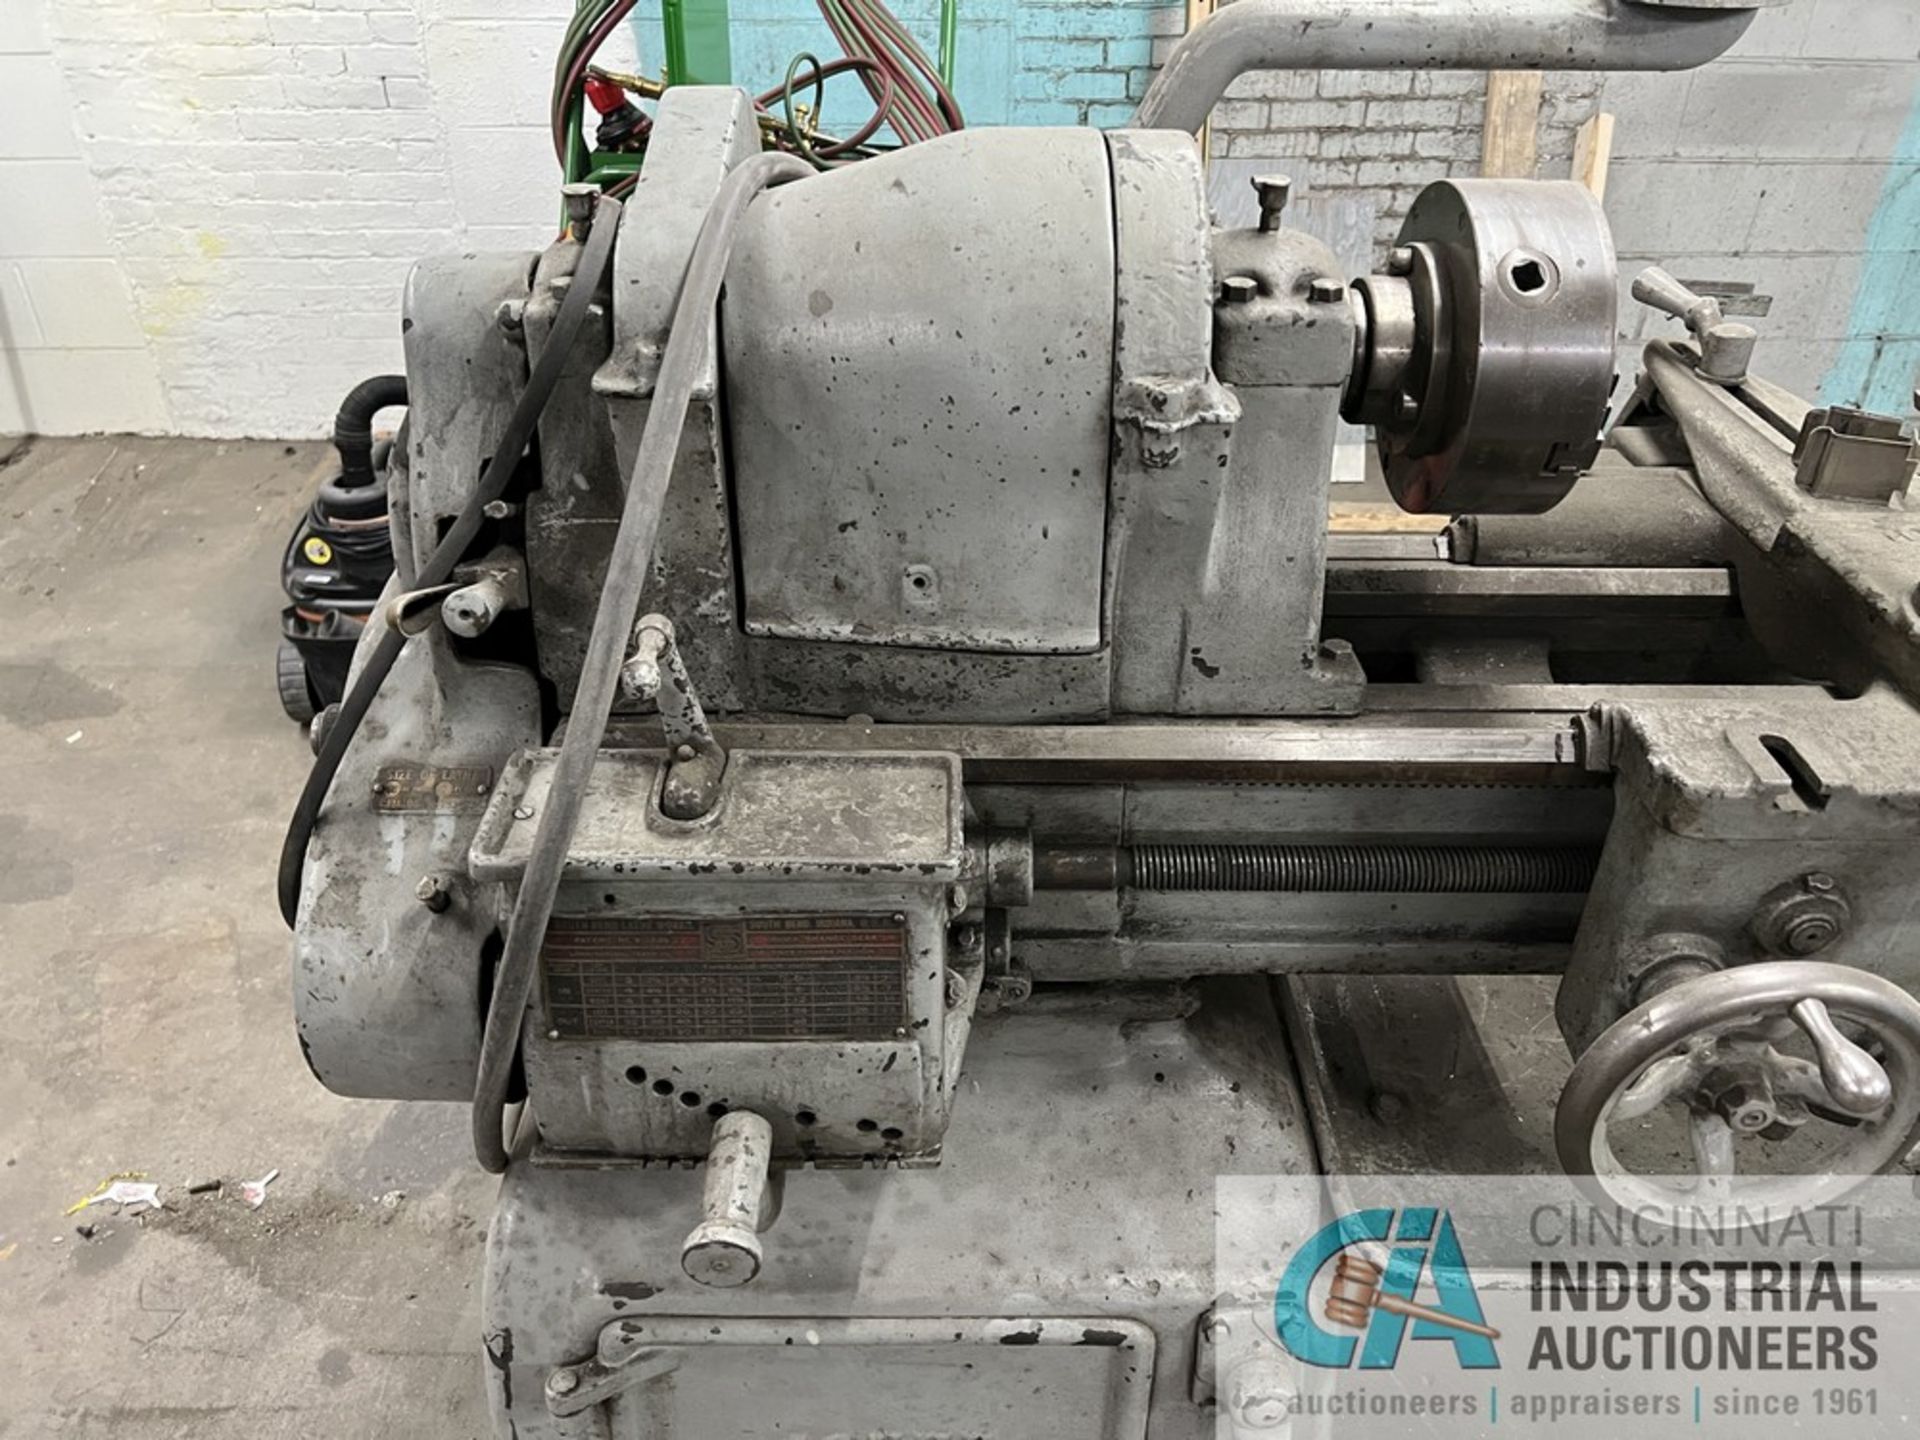 16" X 56" SOUTH BEND ENGINE LATHE; S/N 50199, 7-1/2" 3-JAW CHUCK, TOOLHOLDER, TAILSTOCK - Image 3 of 7